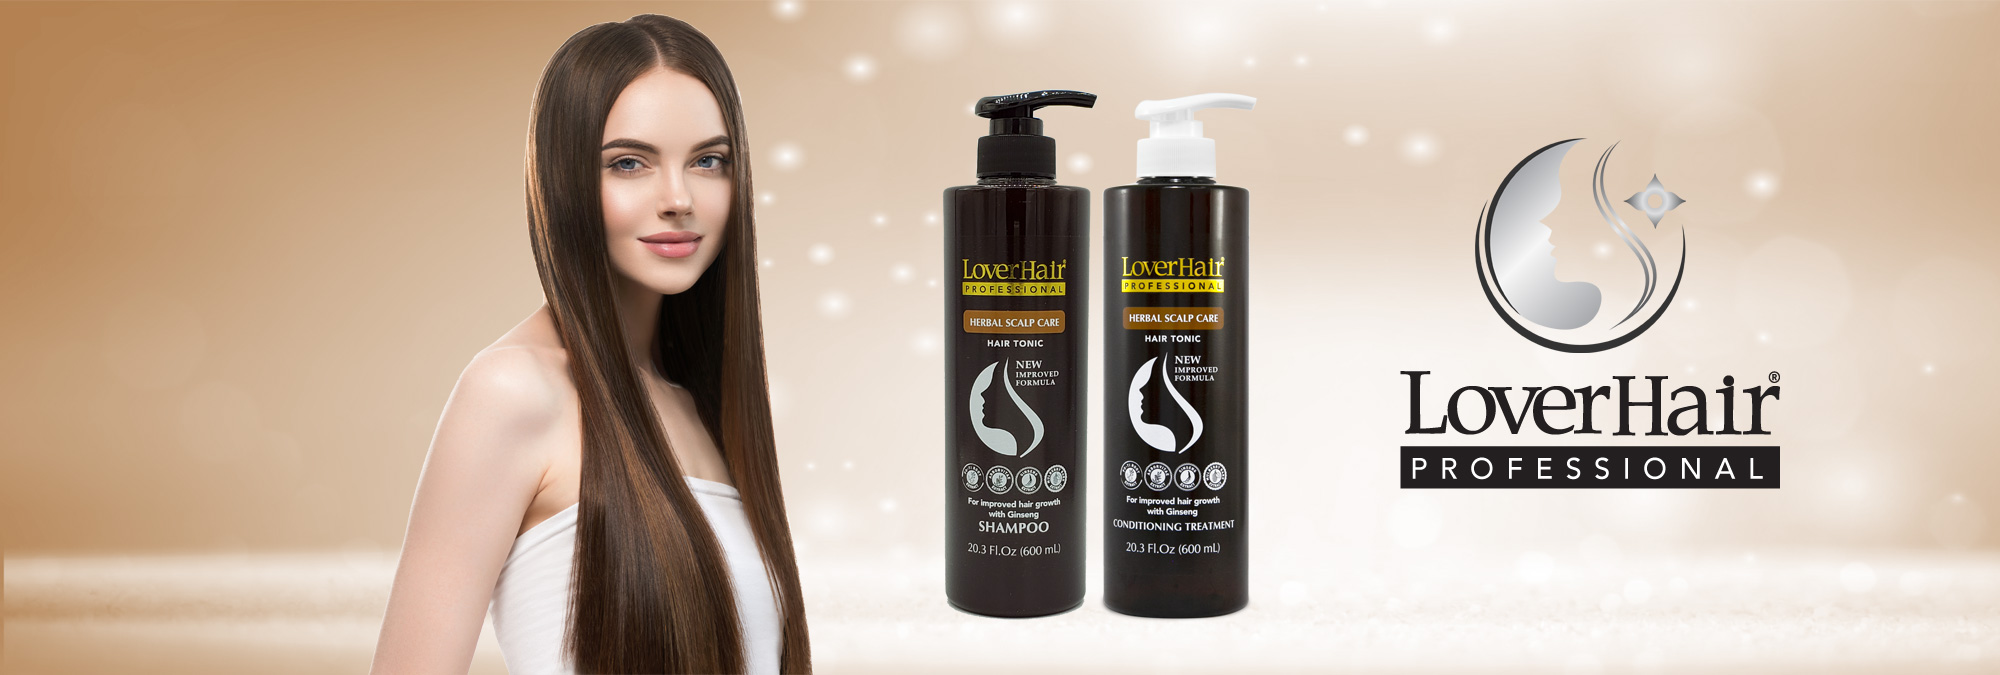 LoverHair Professional Herbal Scalp Care shampoo & conditioner